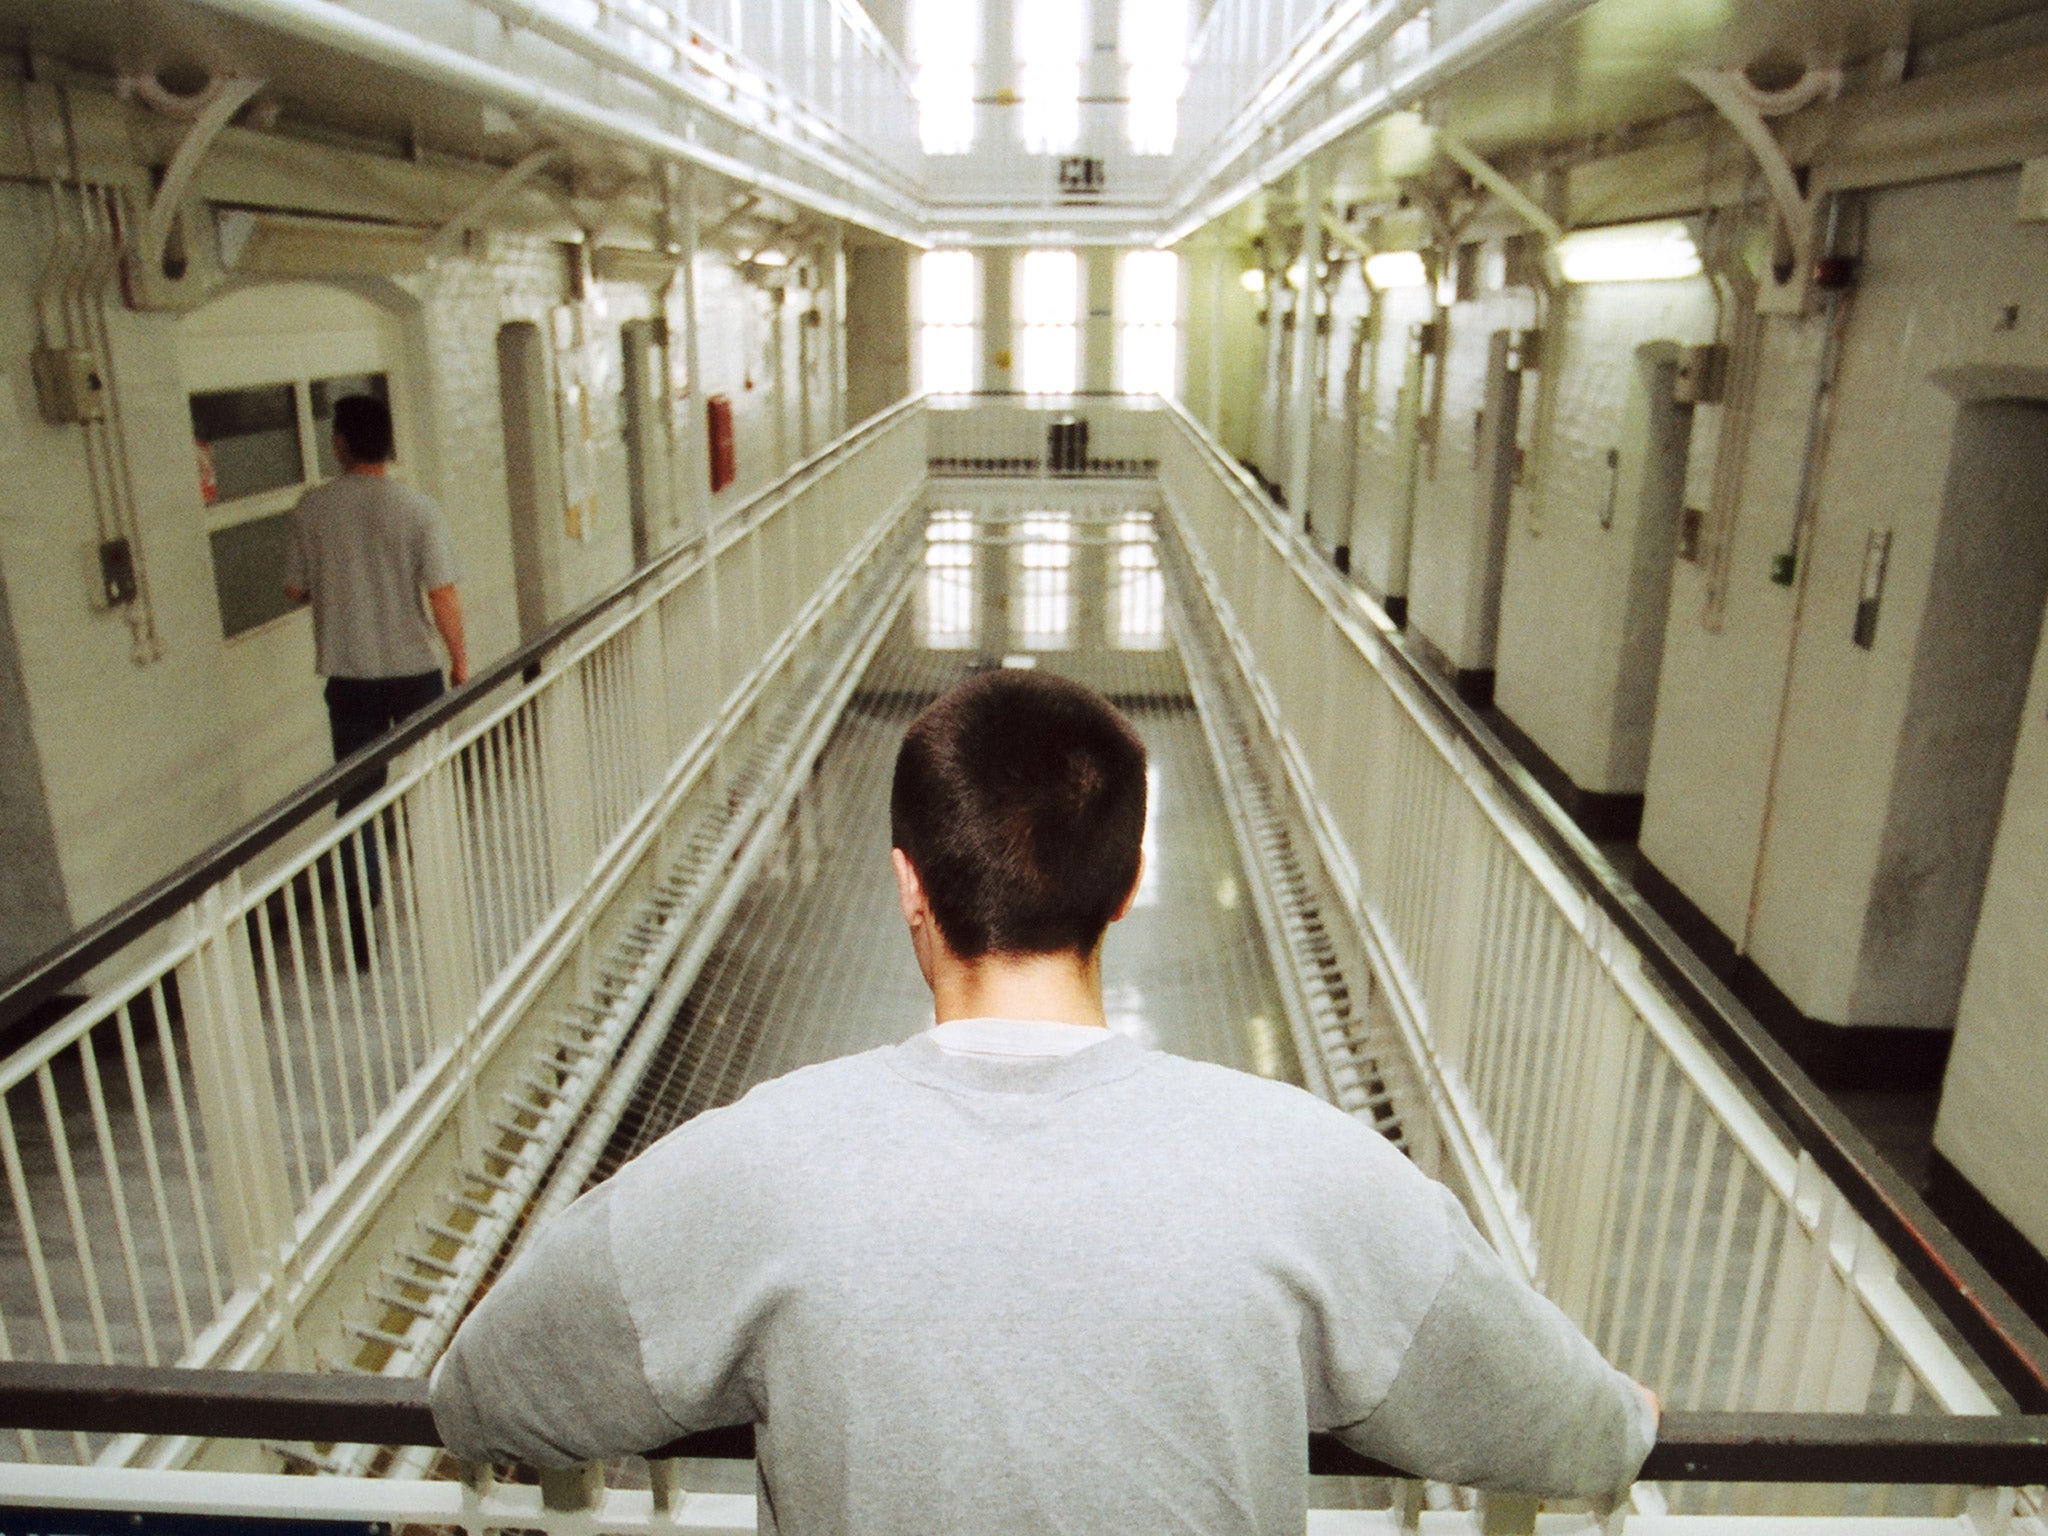 The new scheme will affect tens of thousands of people jailed every year